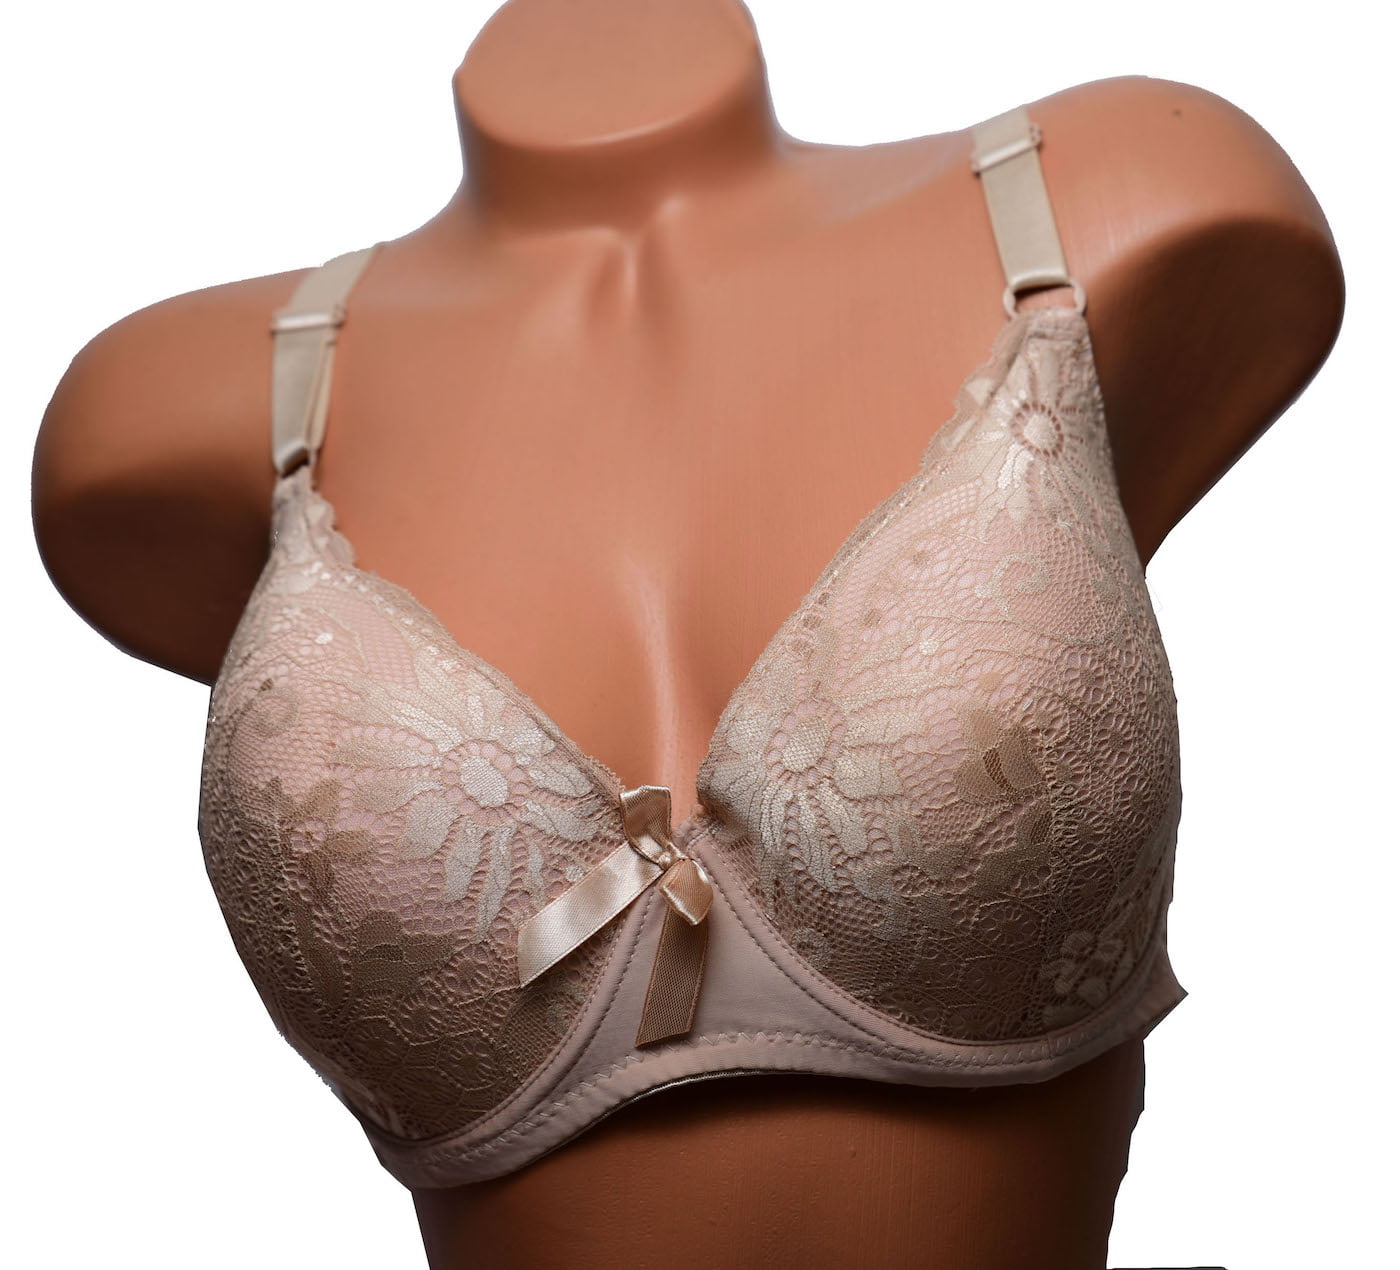 Emily Johnson Women bras 6 pack Plus Size Bra D cup and DD cup DDD cup Size  44DDD (5203) 